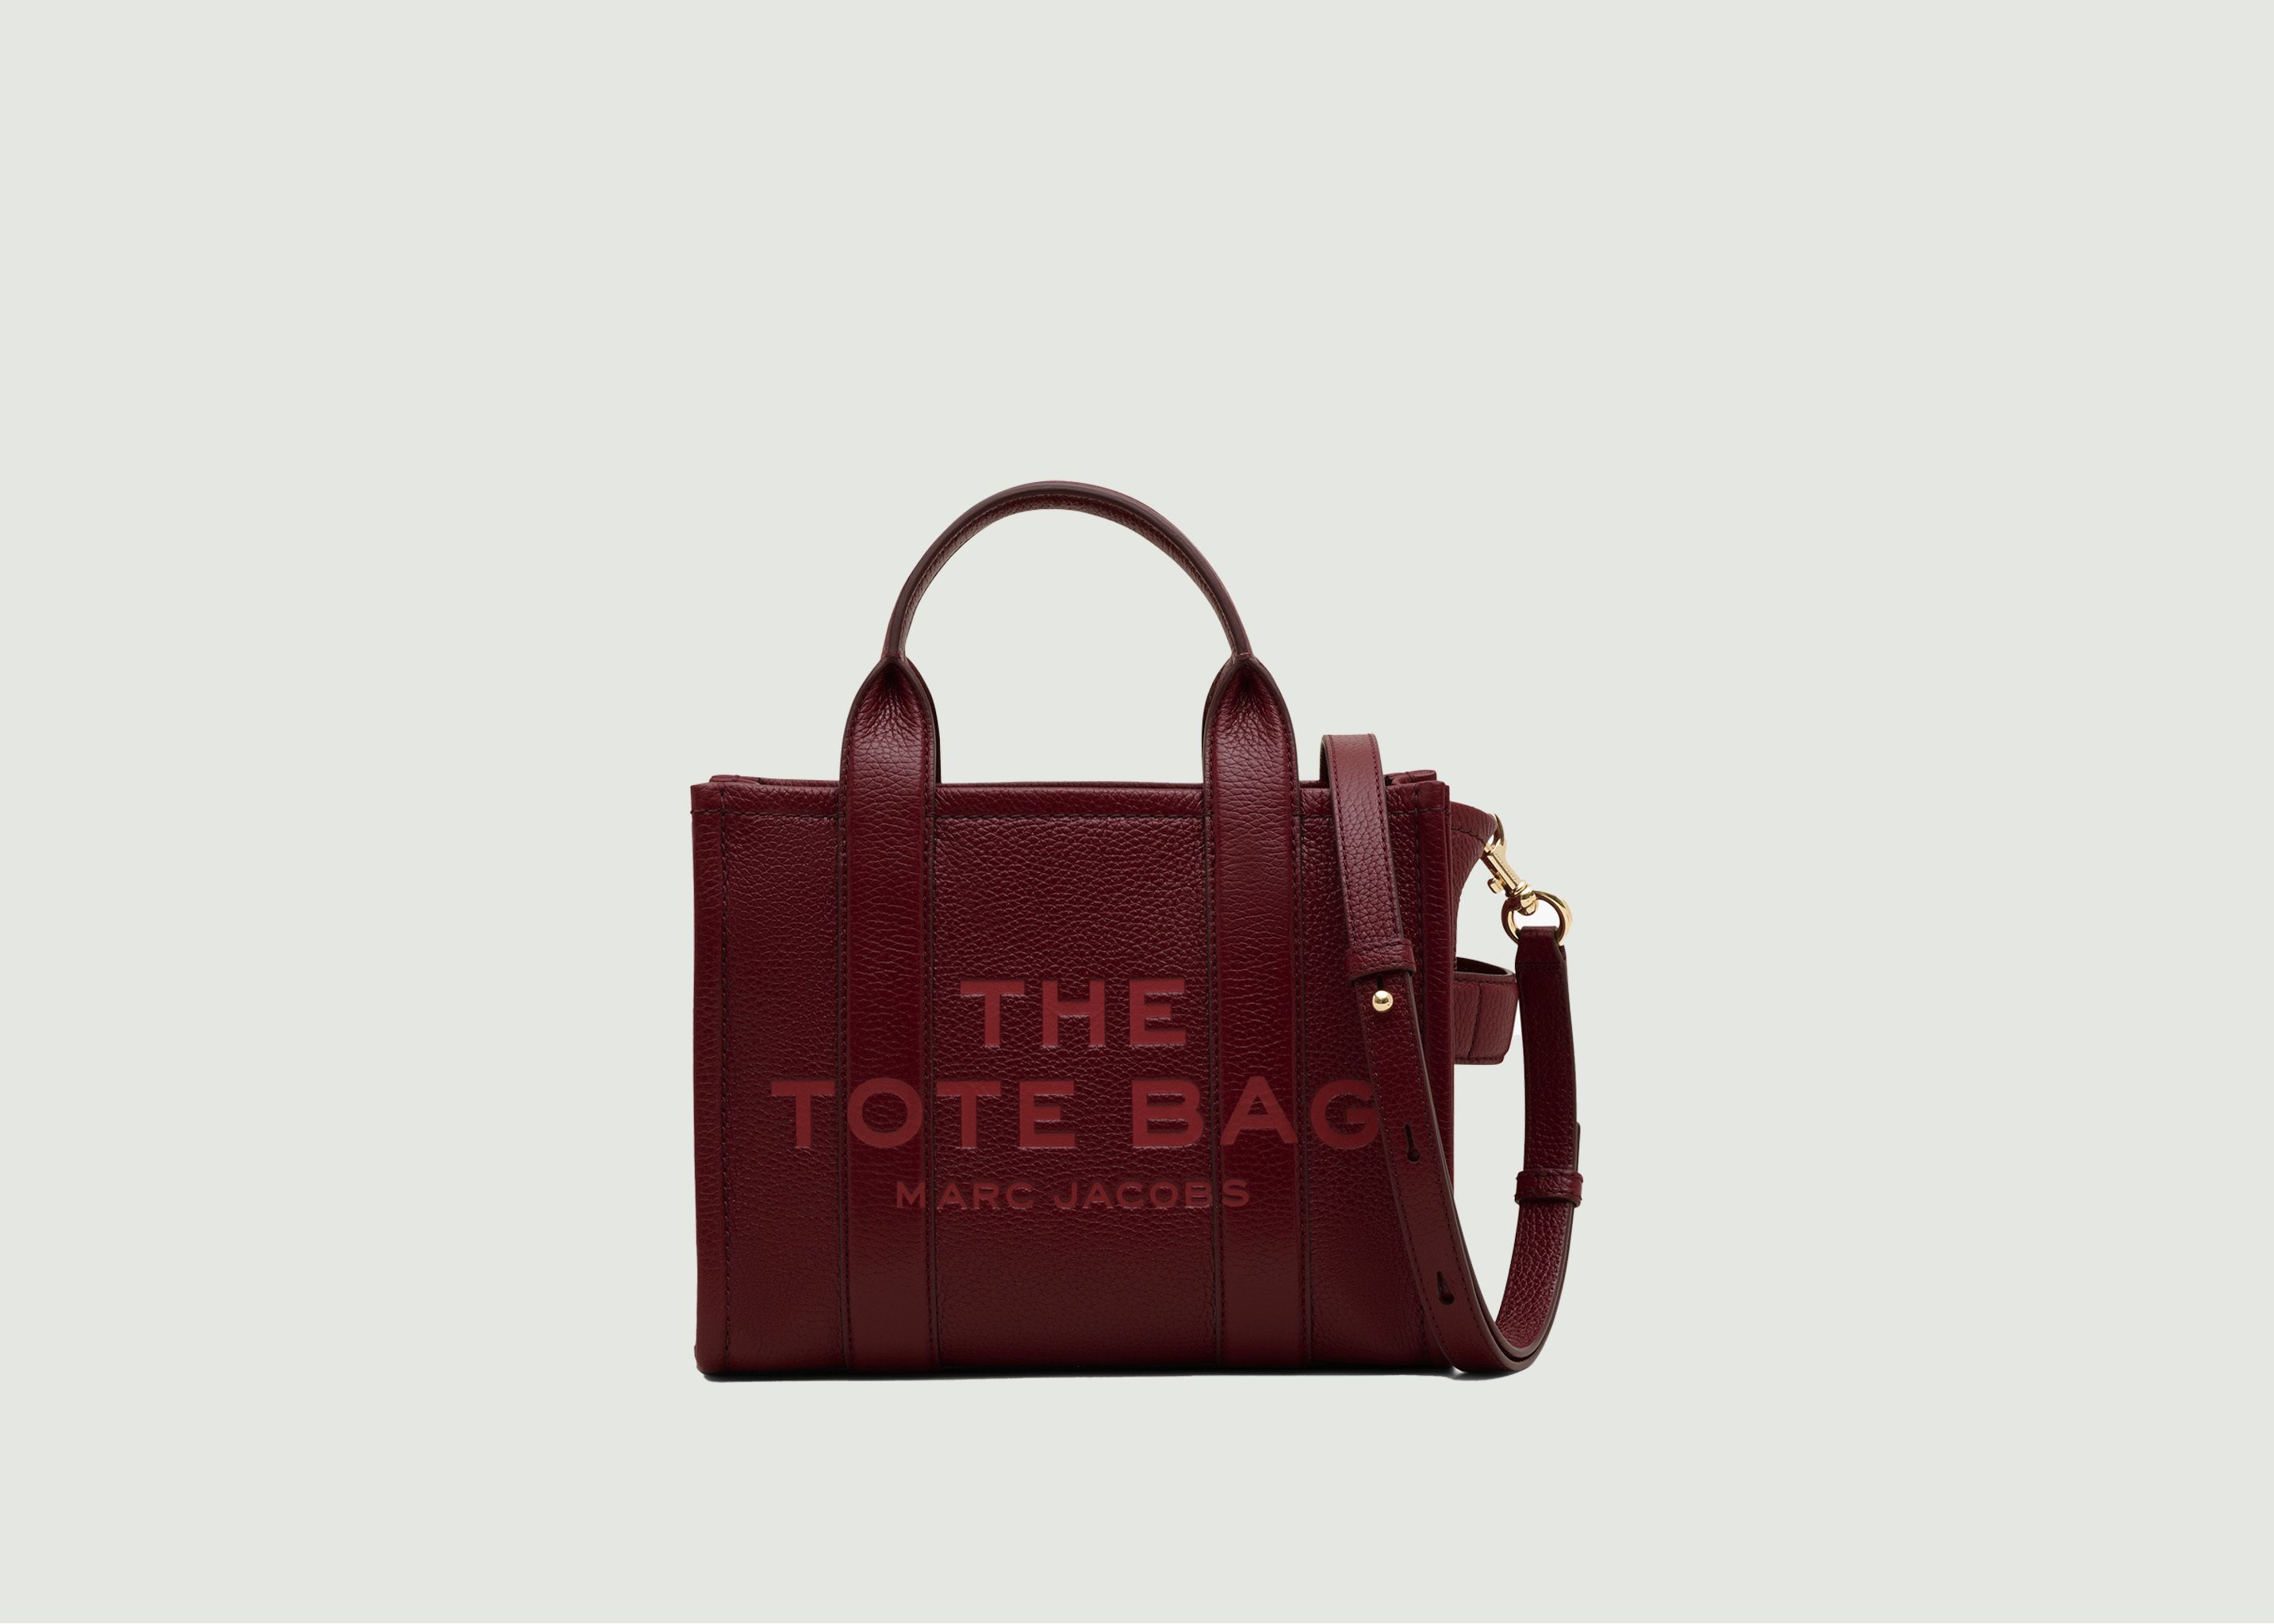 The Small Tote bag - Marc Jacobs